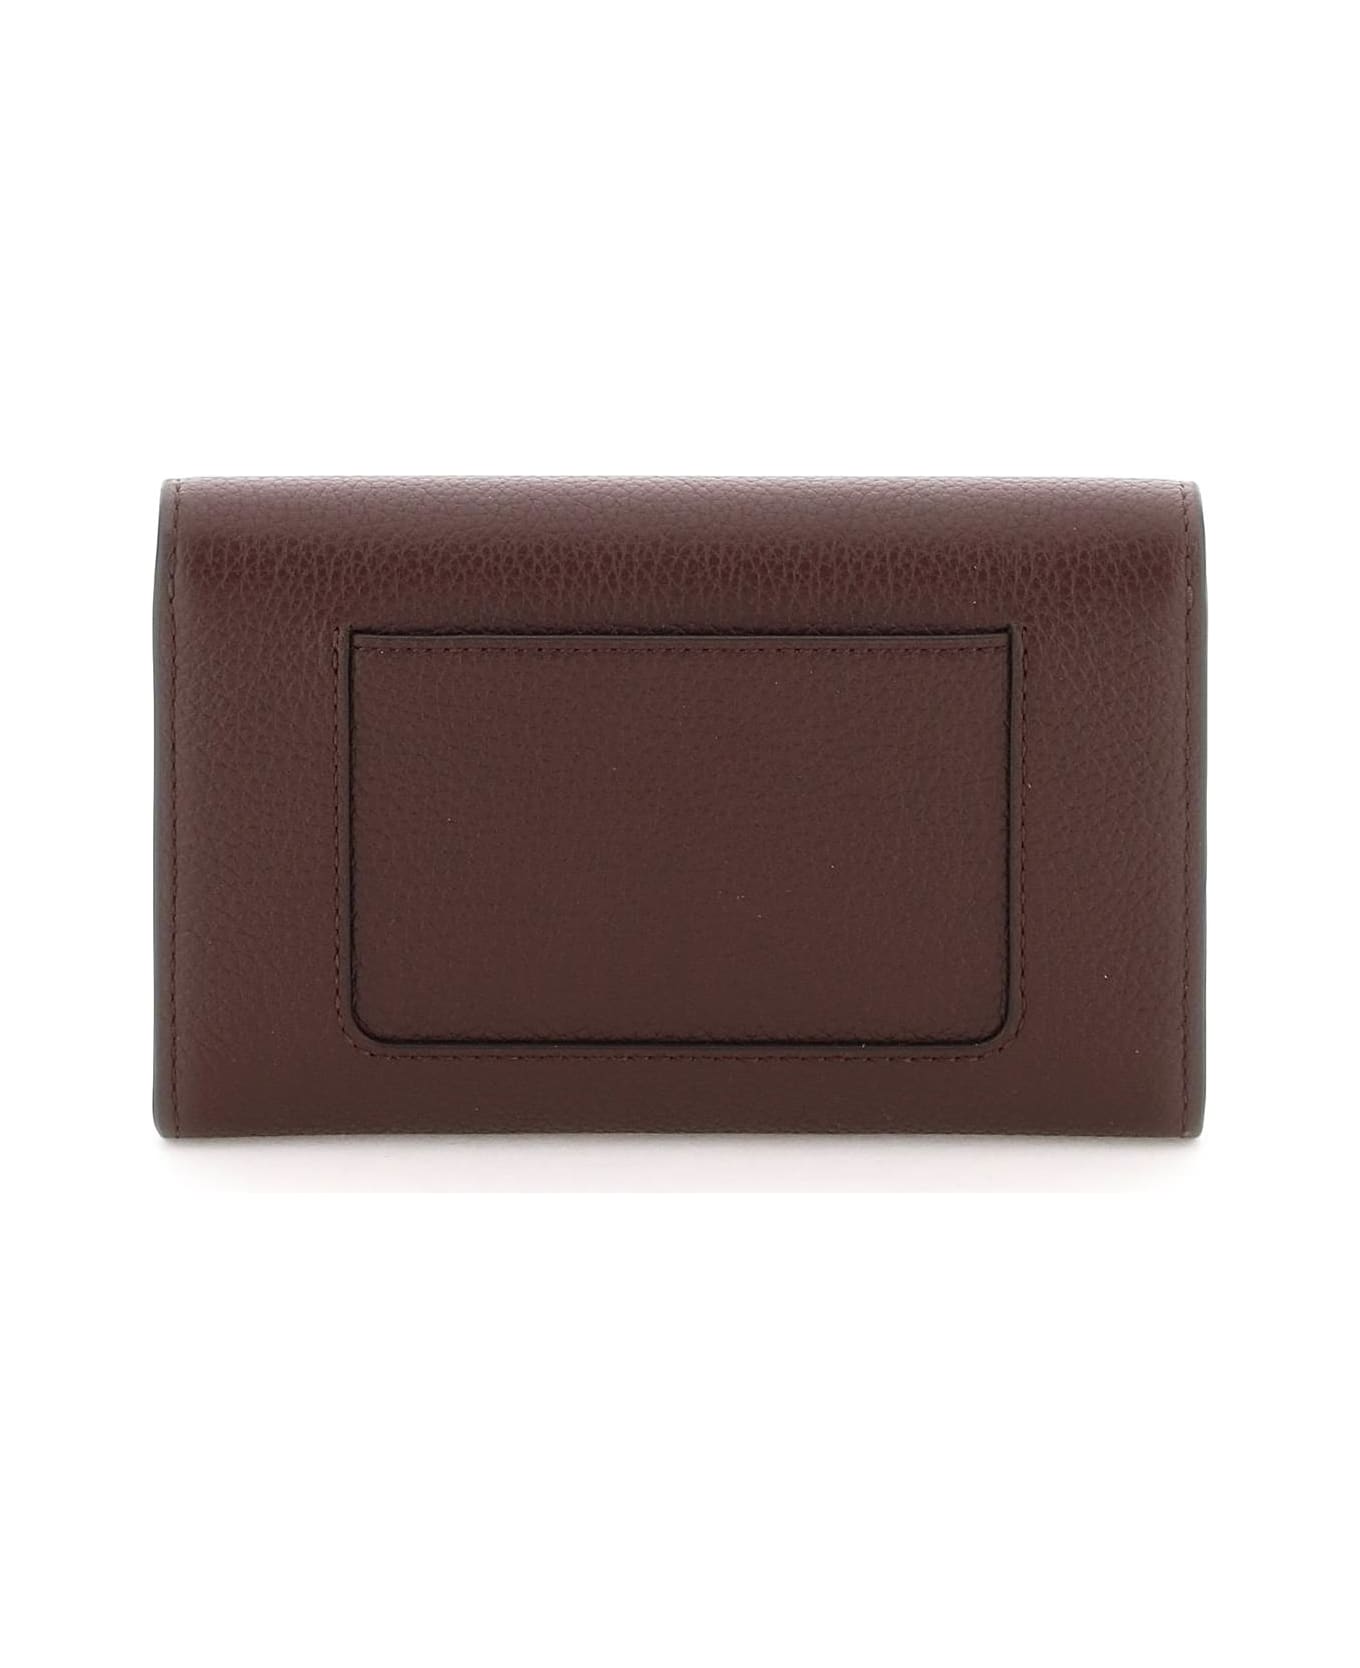 Mulberry Darley Wallet - OXBLOOD (Red) 財布